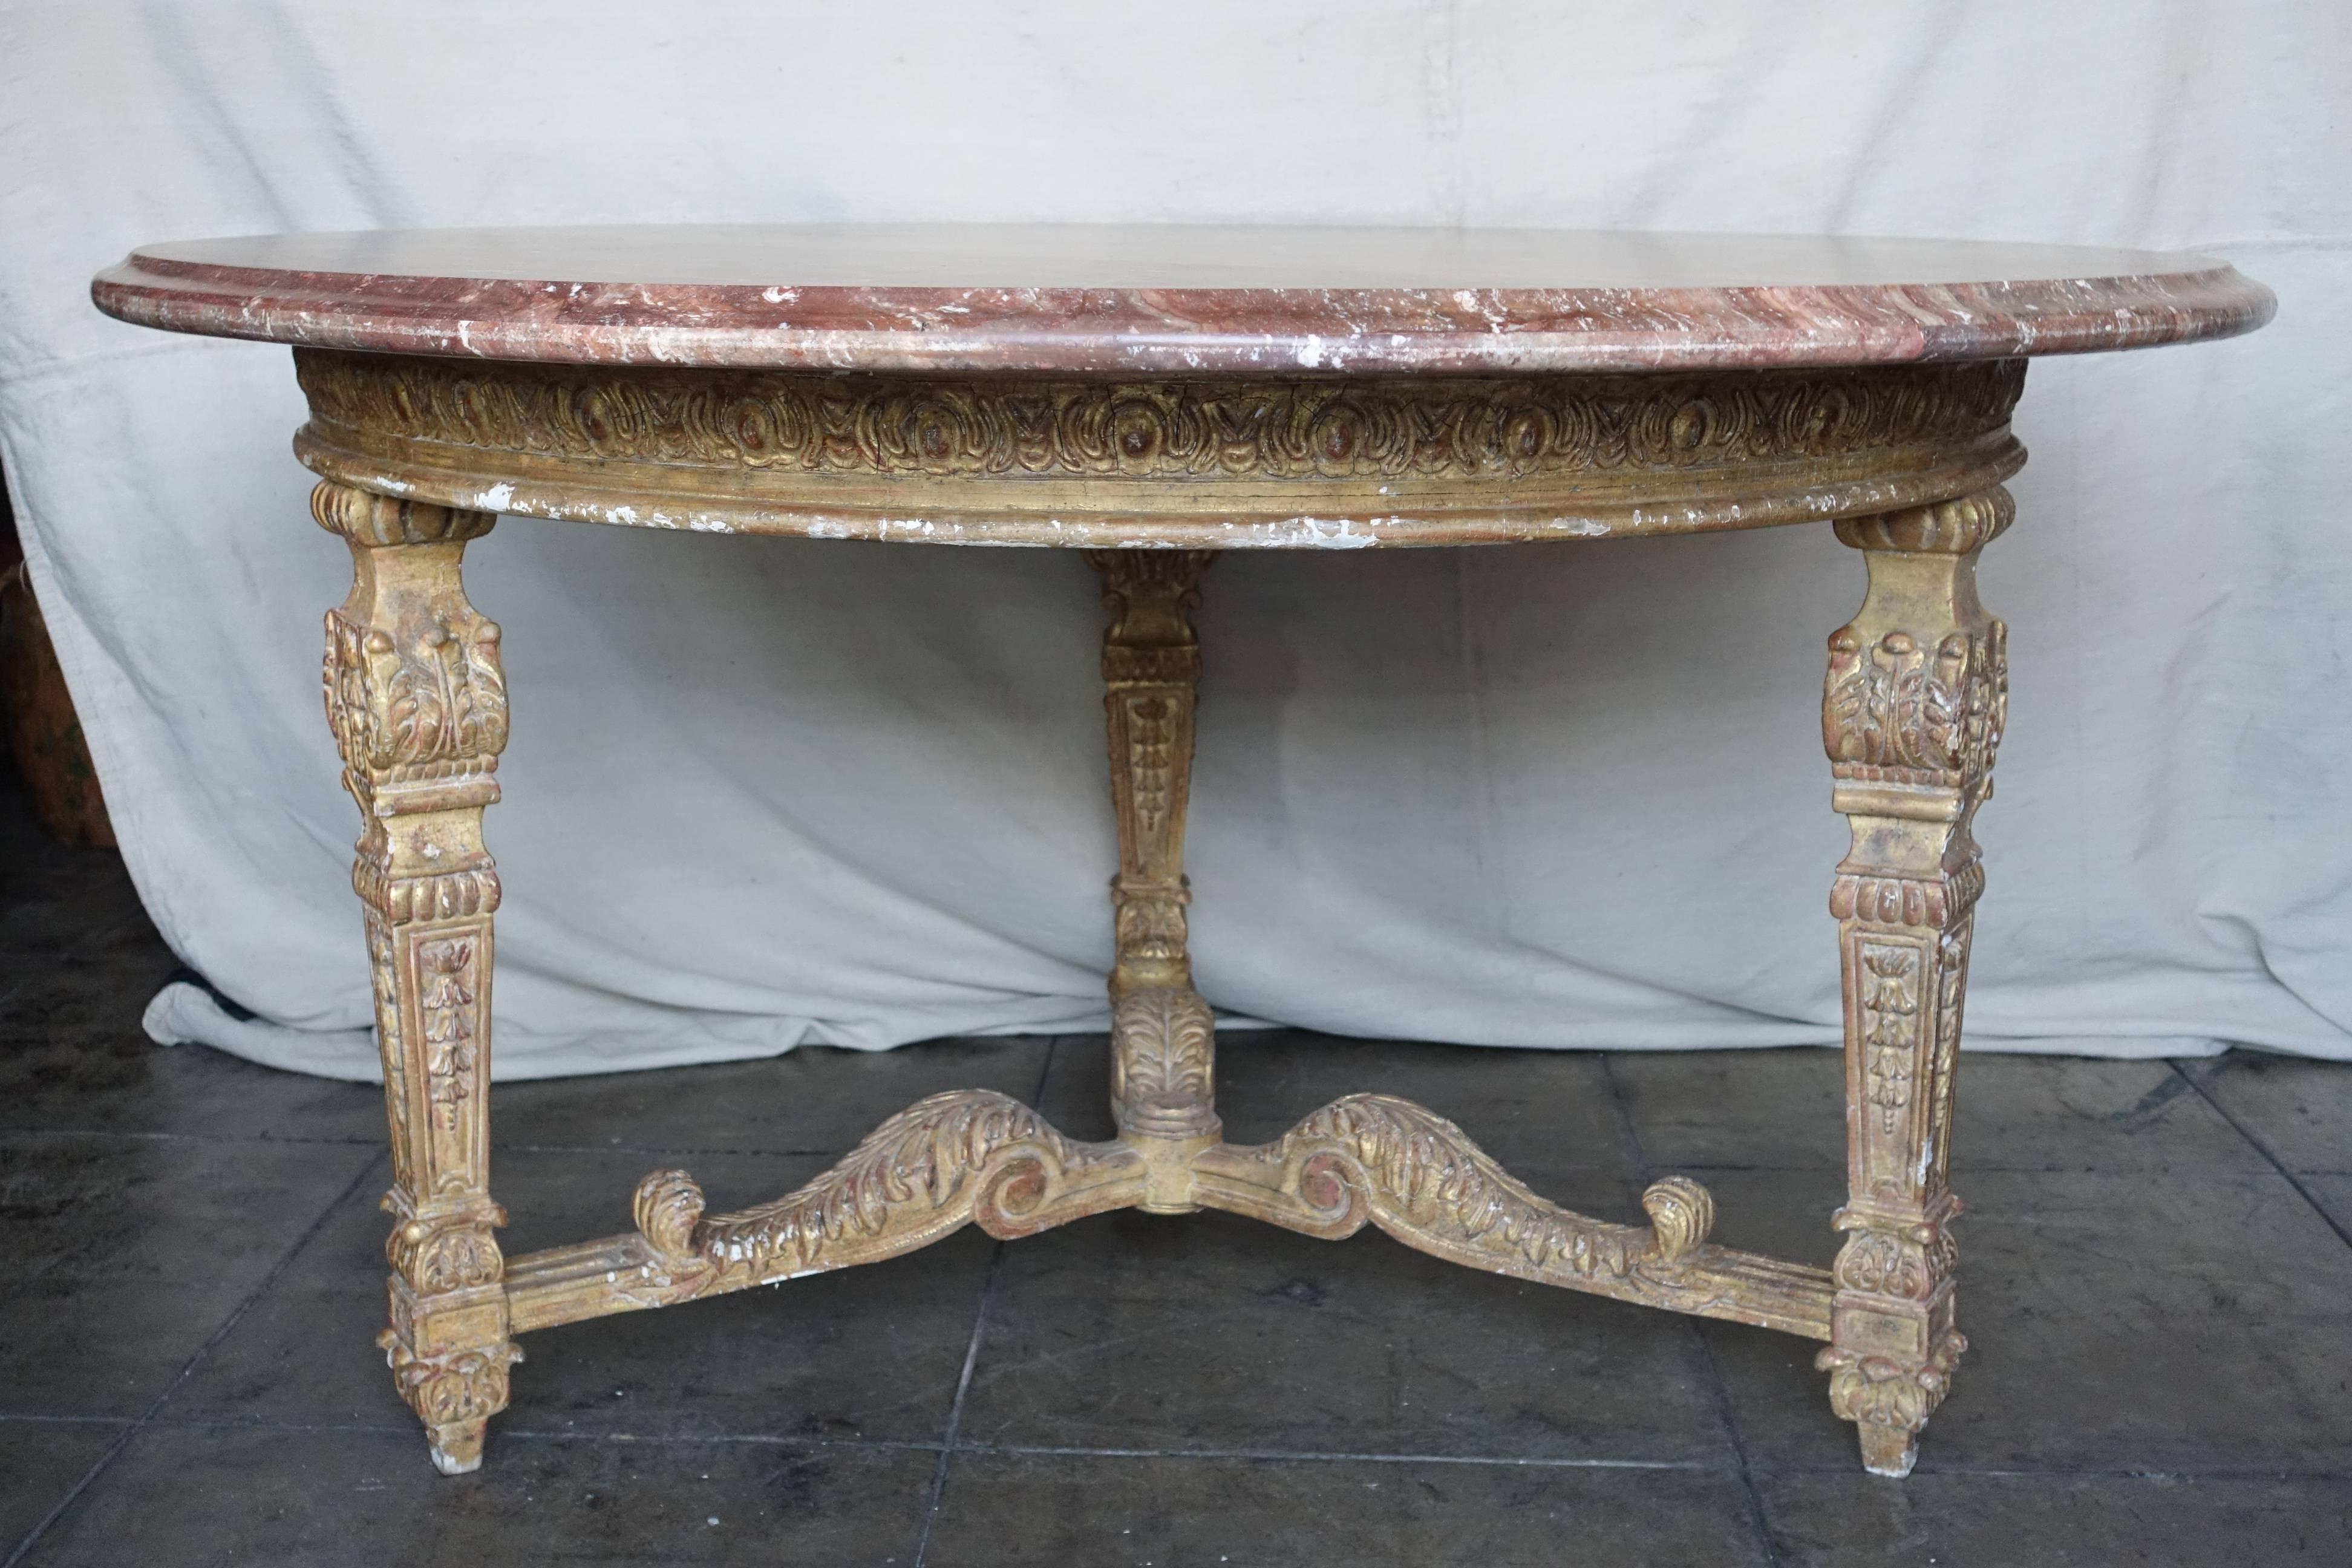 Italian 22-karat giltwood neoclassical style table standing on three straight legs that join together with a bottom stretcher. Marble top with ogee bullnose detail. Marble has repairs.